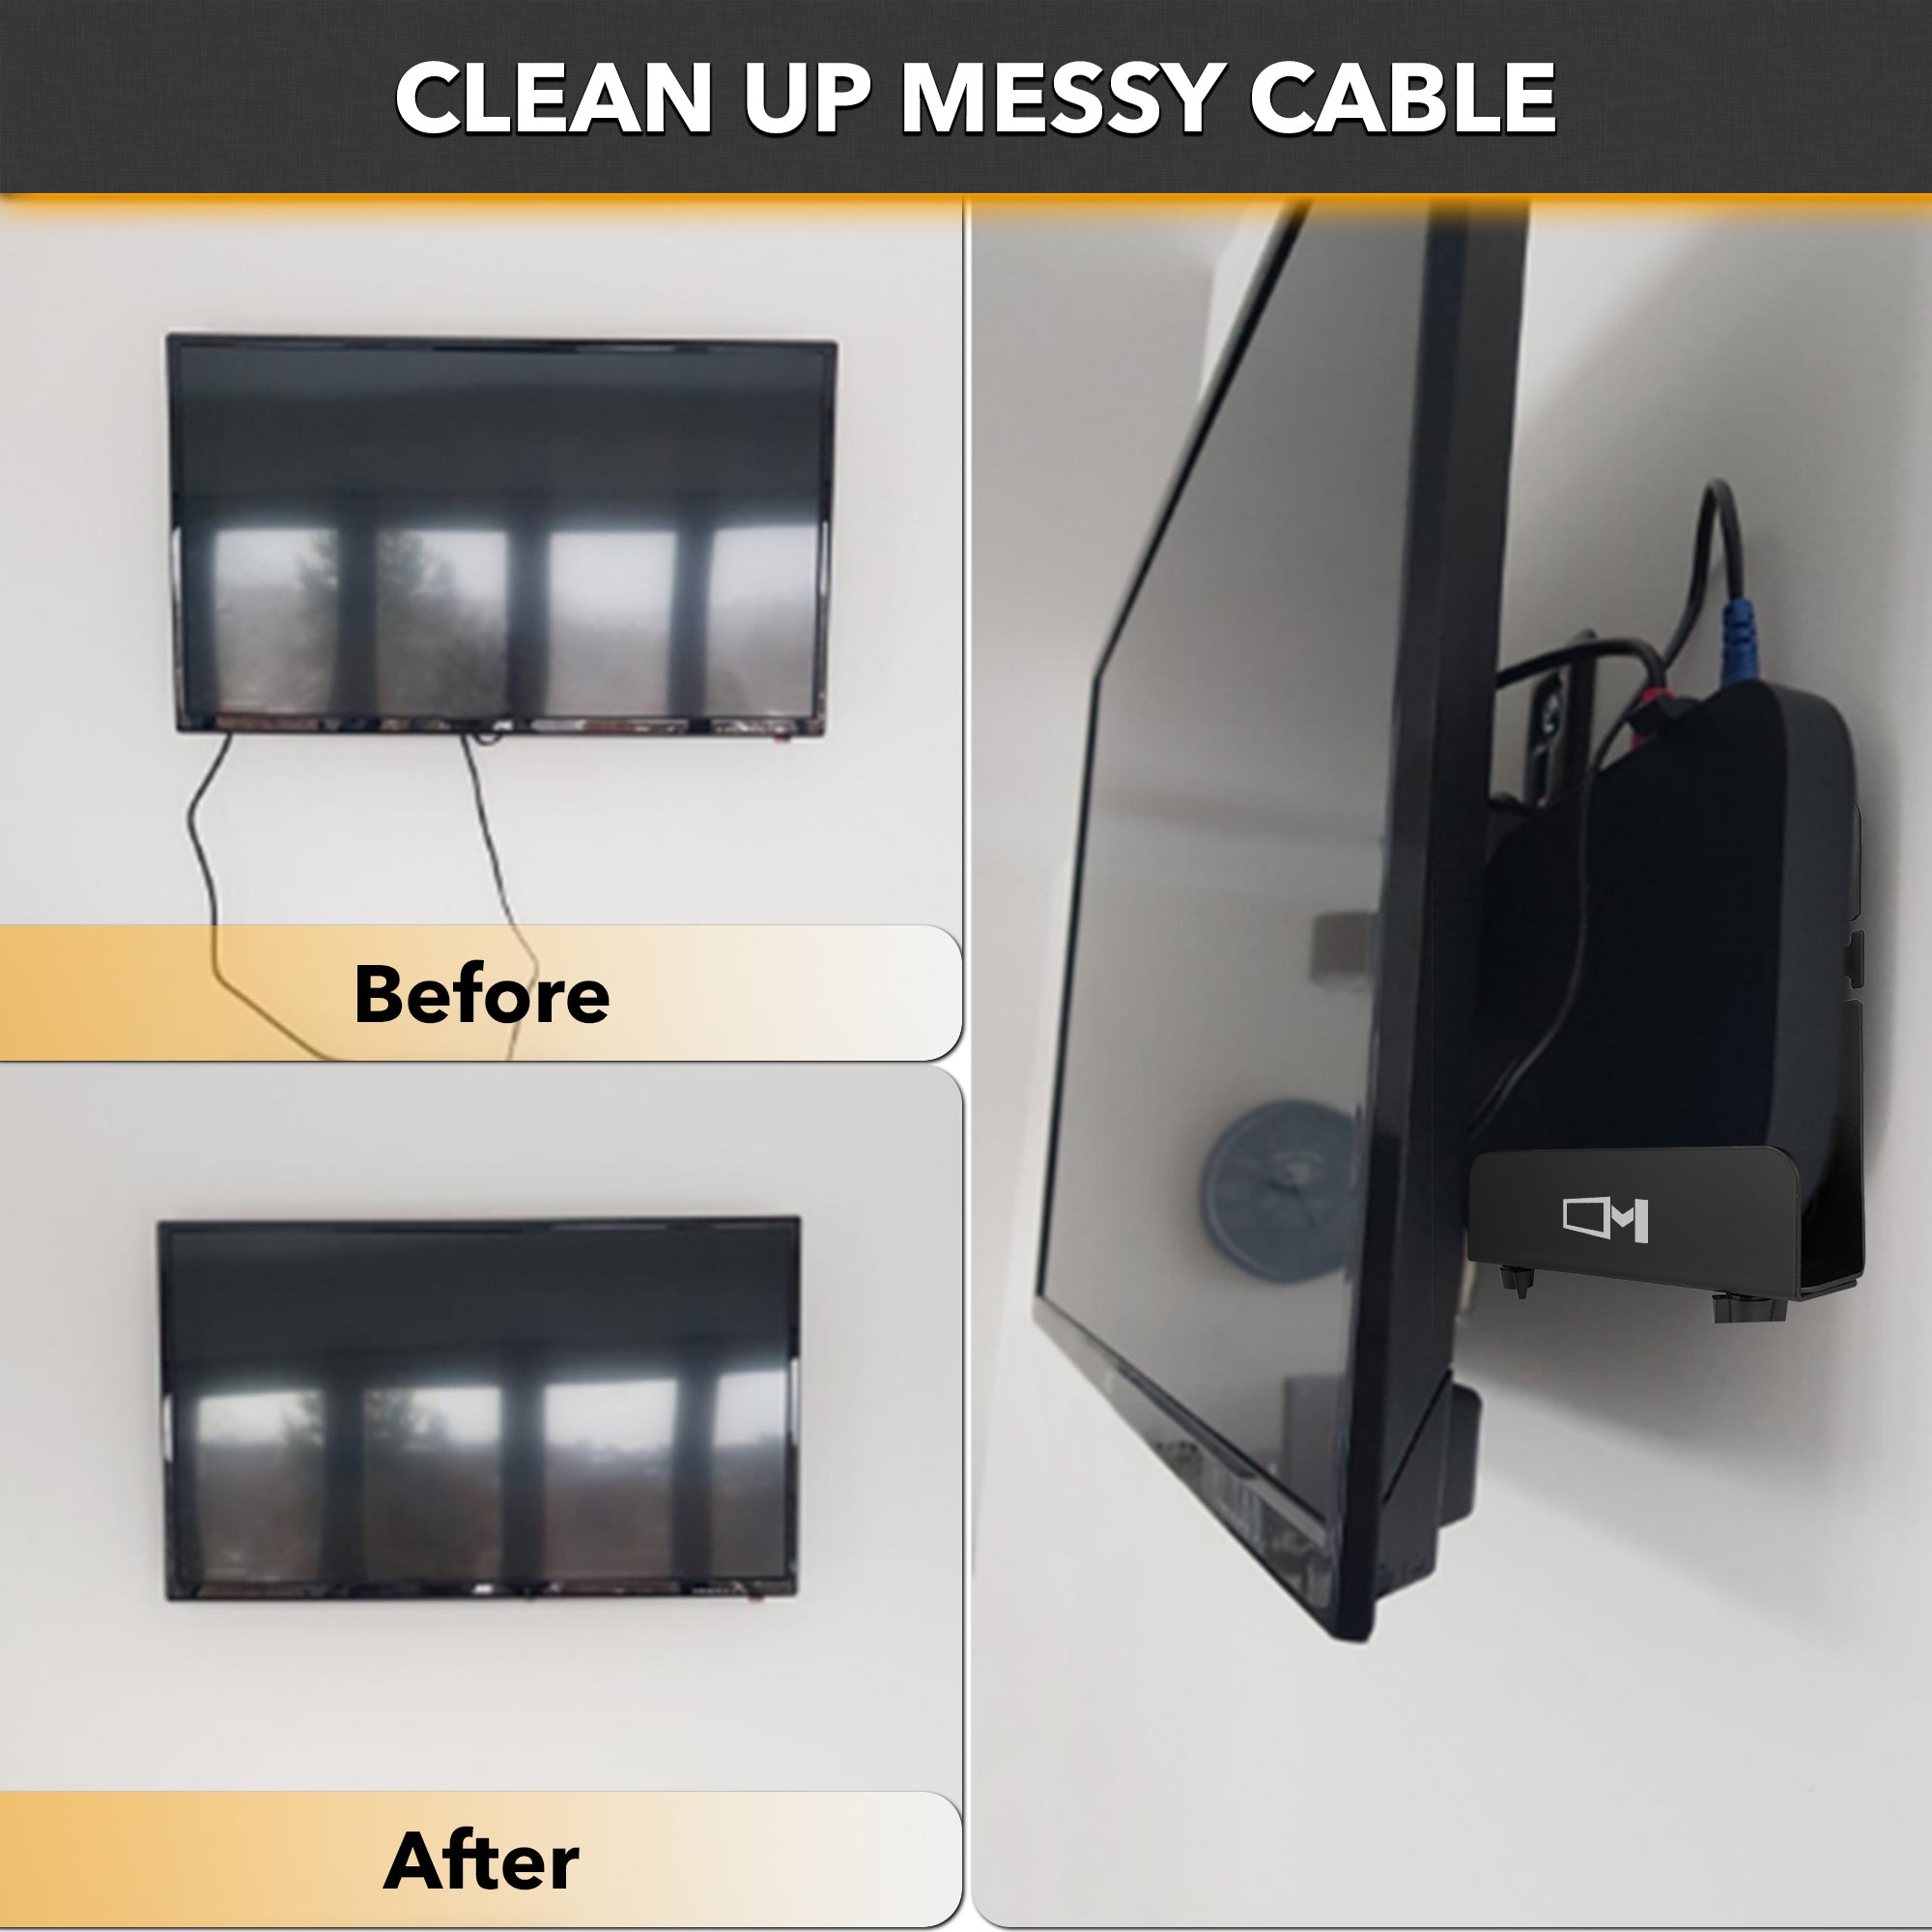 HOW TO HIDE TV CABLES INSIDE THE WALL BEHIND A MOUNTED TV – Stay